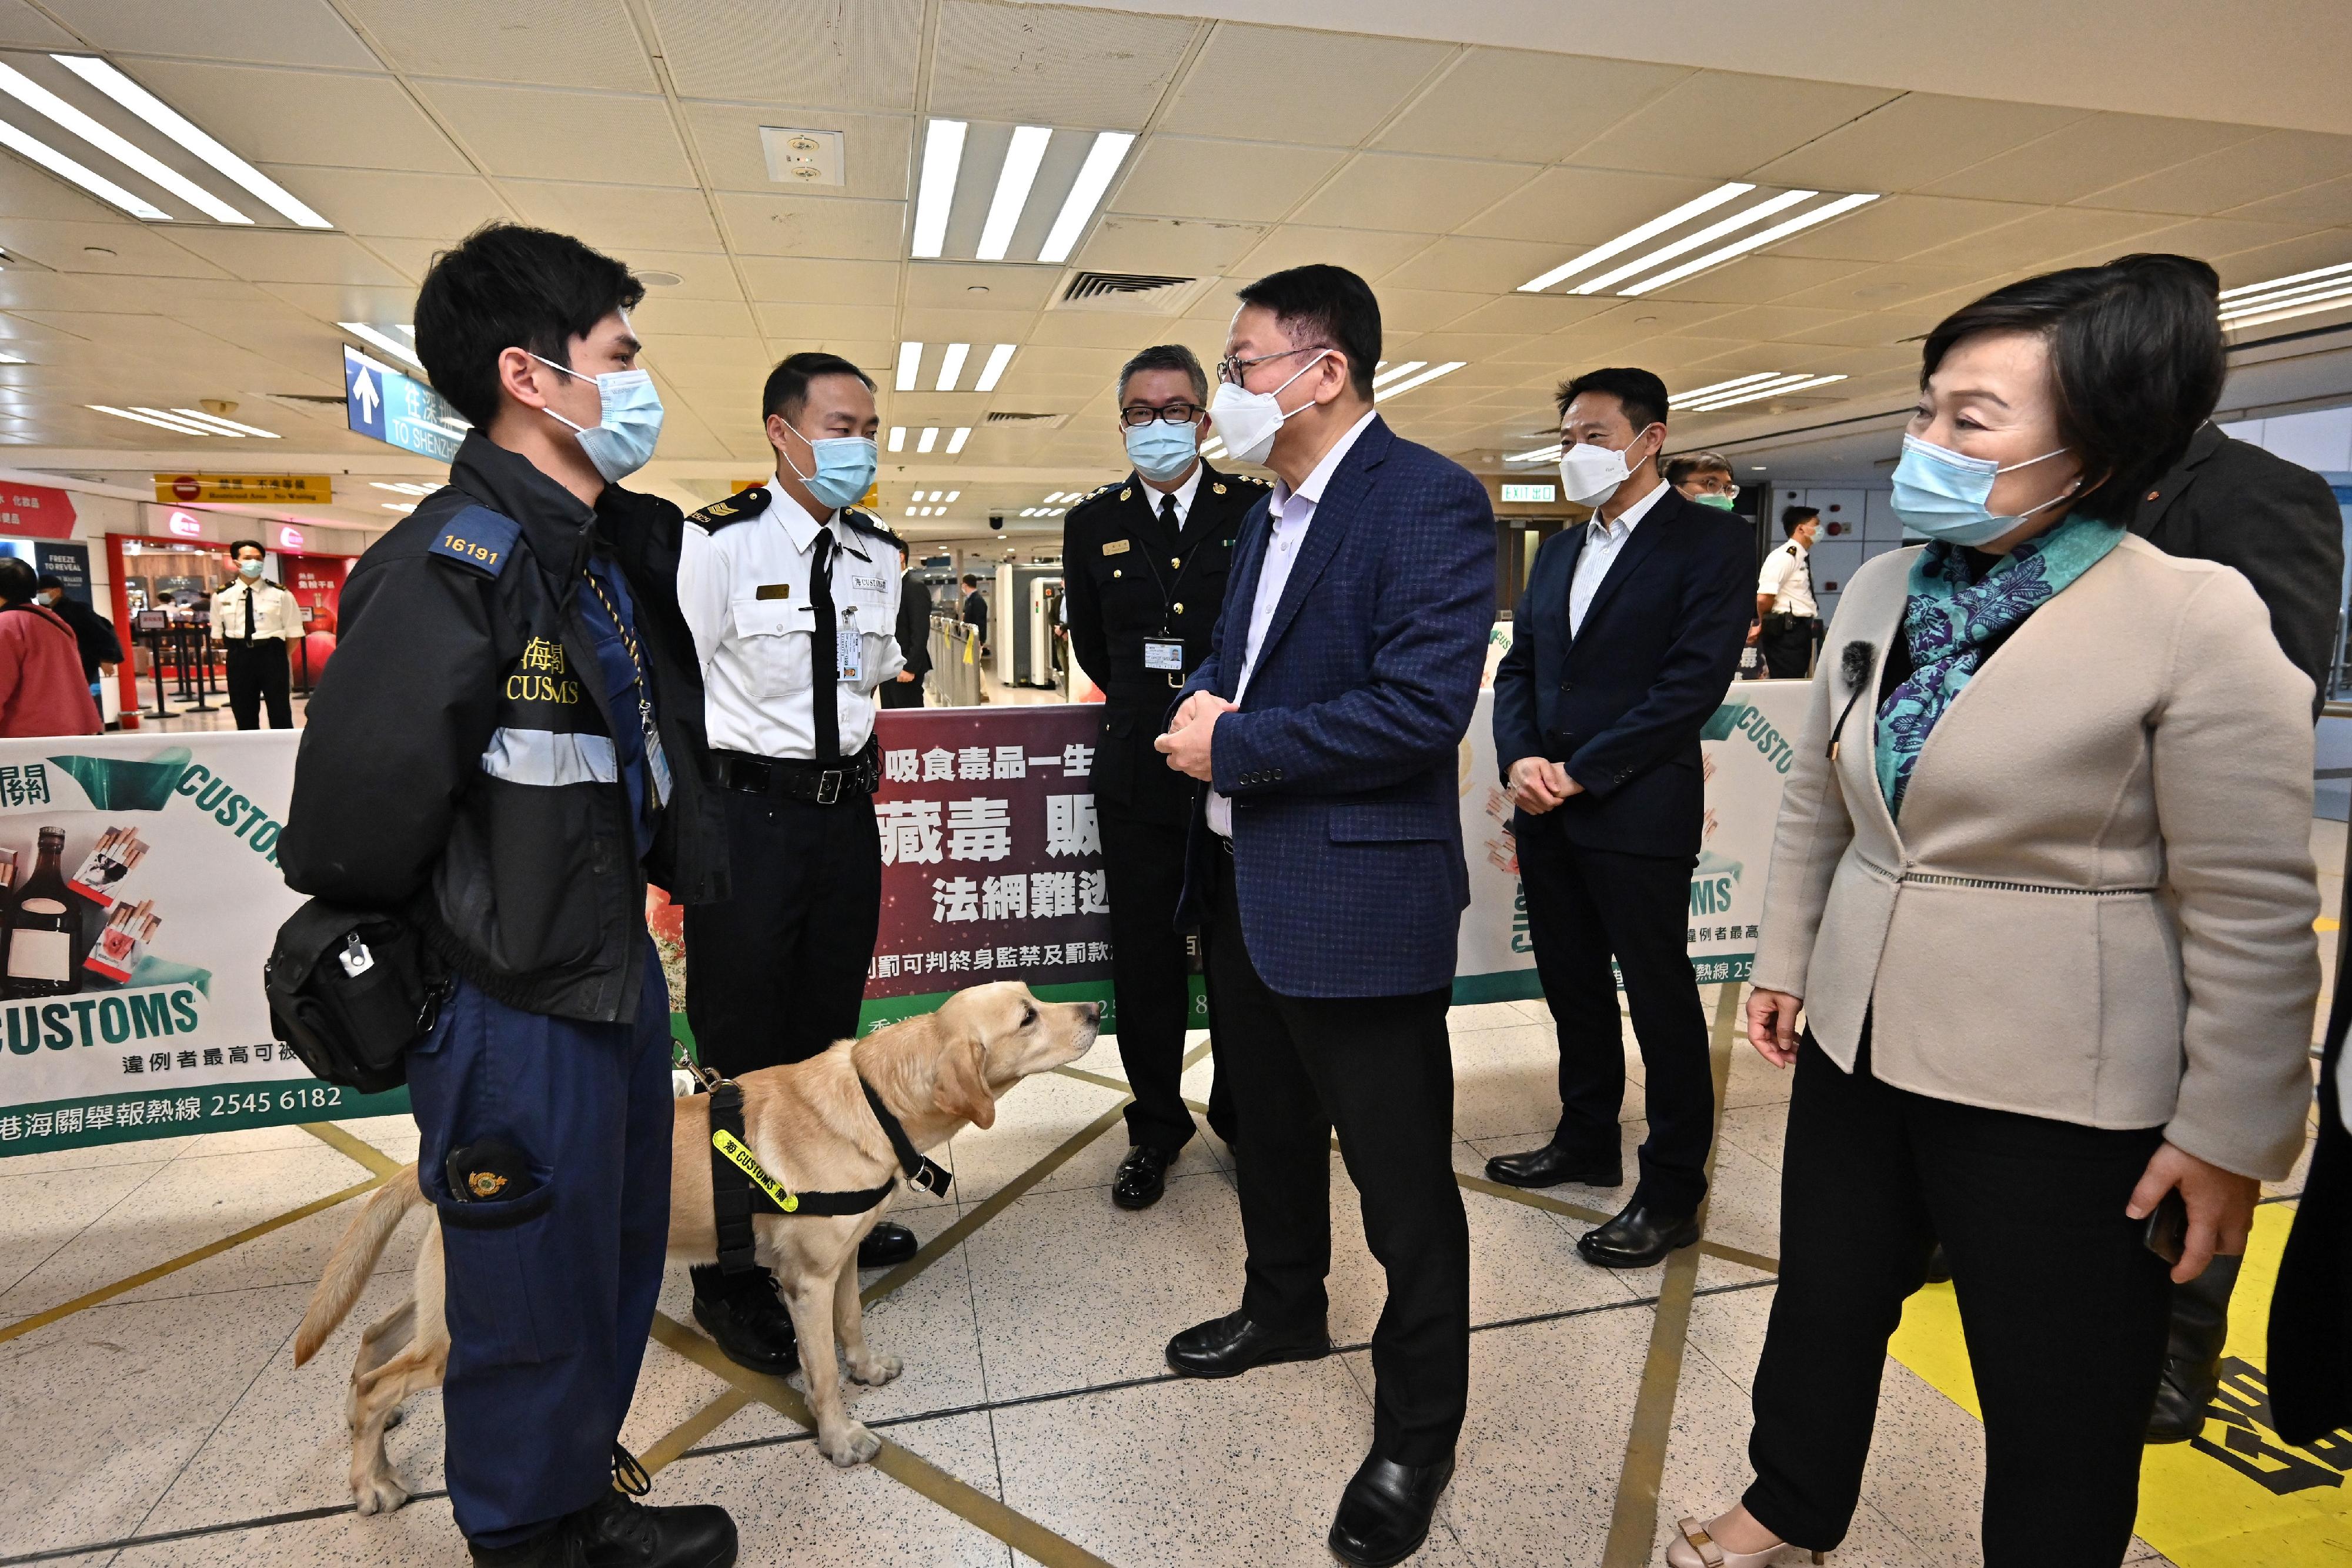 The Acting Chief Executive, Mr Chan Kwok-ki, this morning (February 6) inspected the Lo Wu Control Point to learn about the situation on the first day of full resumption of normal travel between Hong Kong and the Mainland. Photo shows Mr Chan (third right) and the Secretary for Education, Dr Choi Yuk-lin (first right), meeting the frontline staff of the Customs and Excise Department on duty.